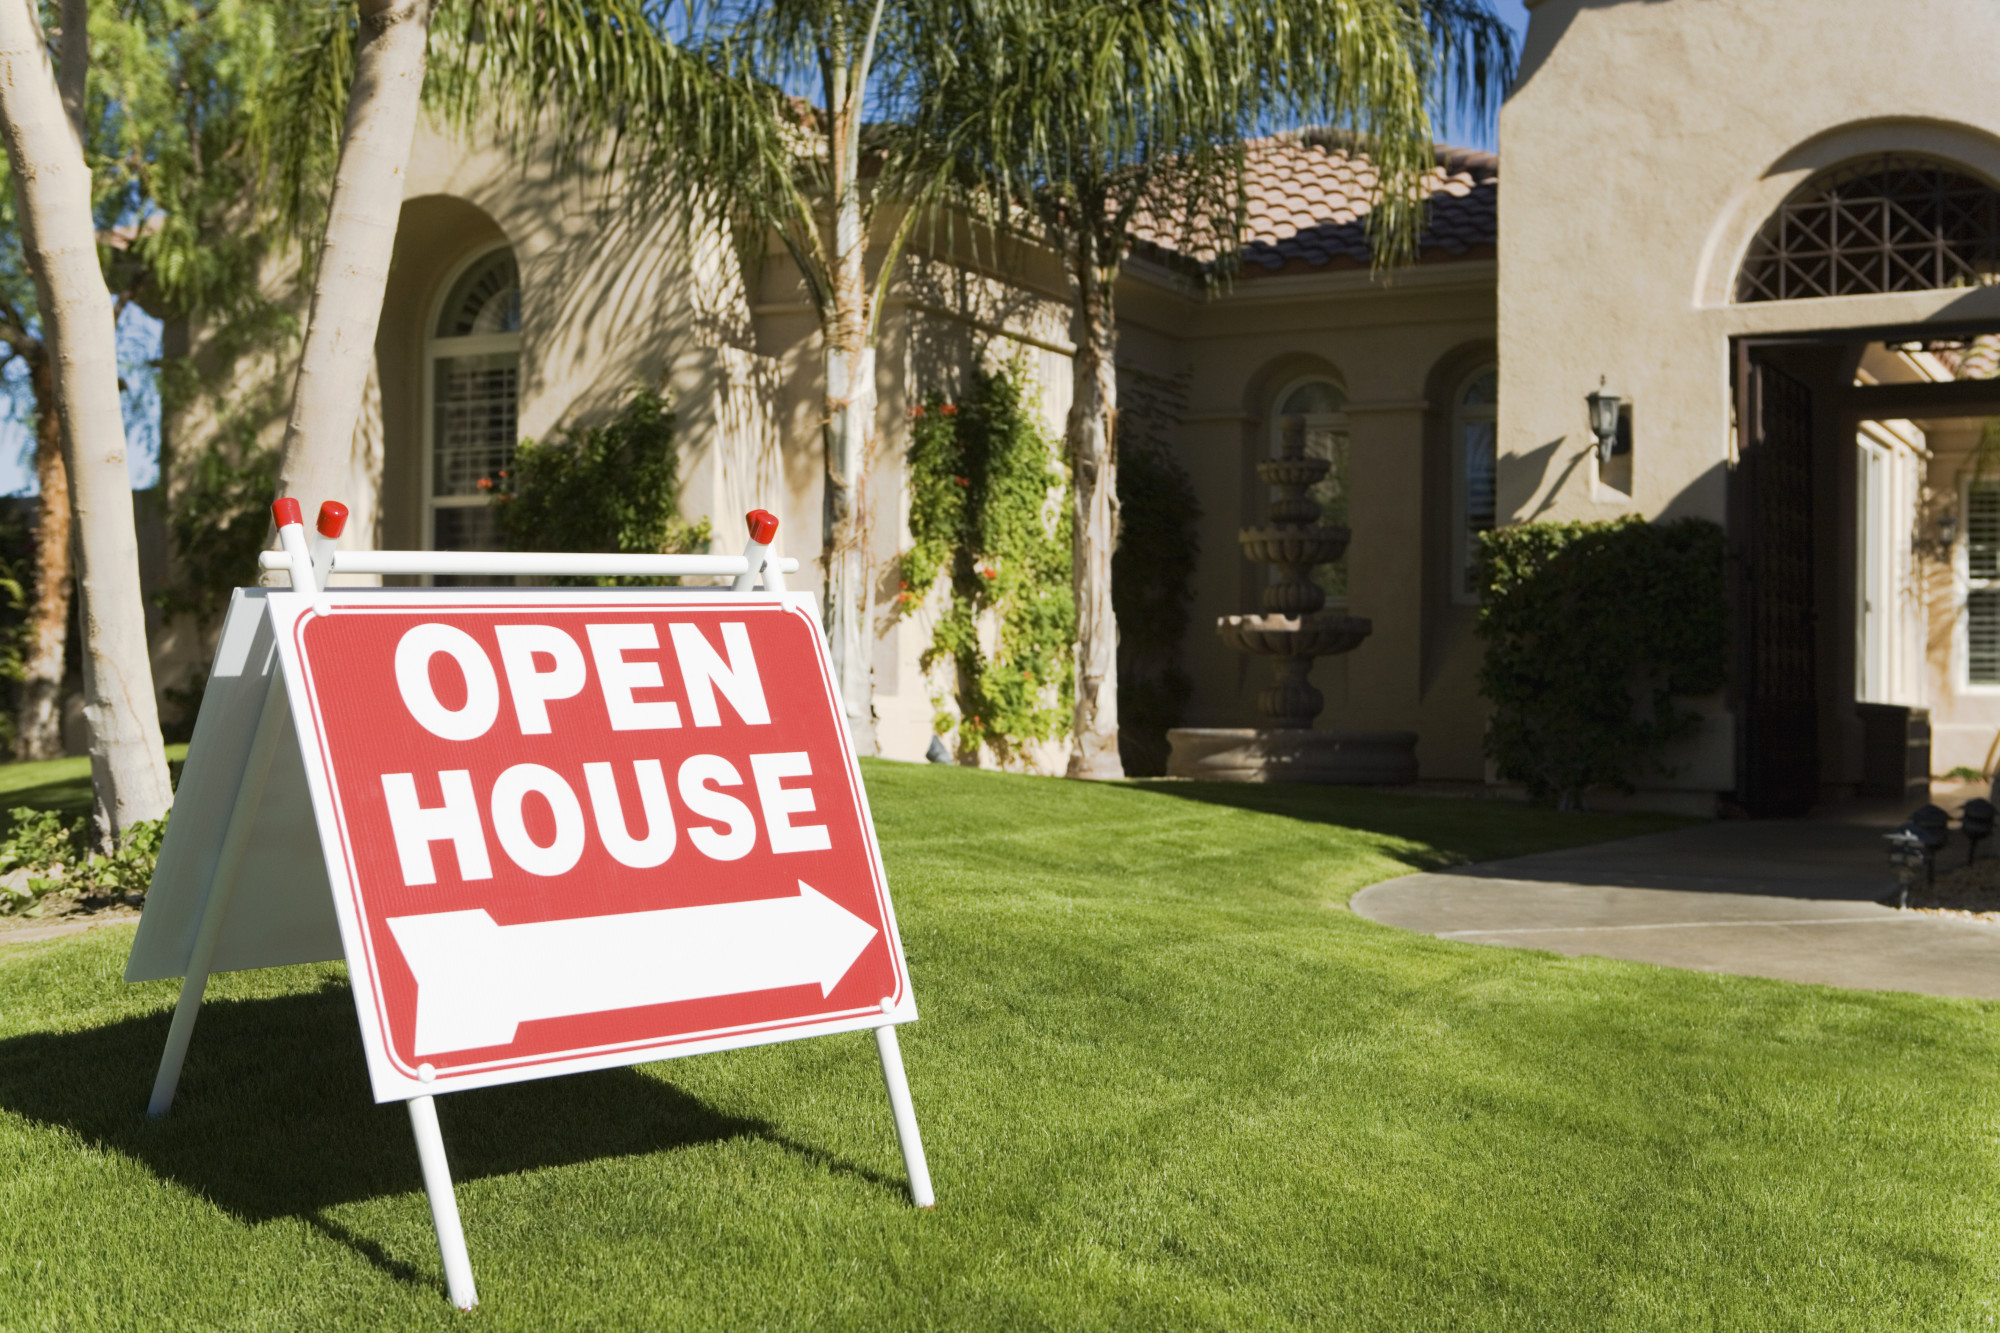 How to Prepare Your Home for an Open House